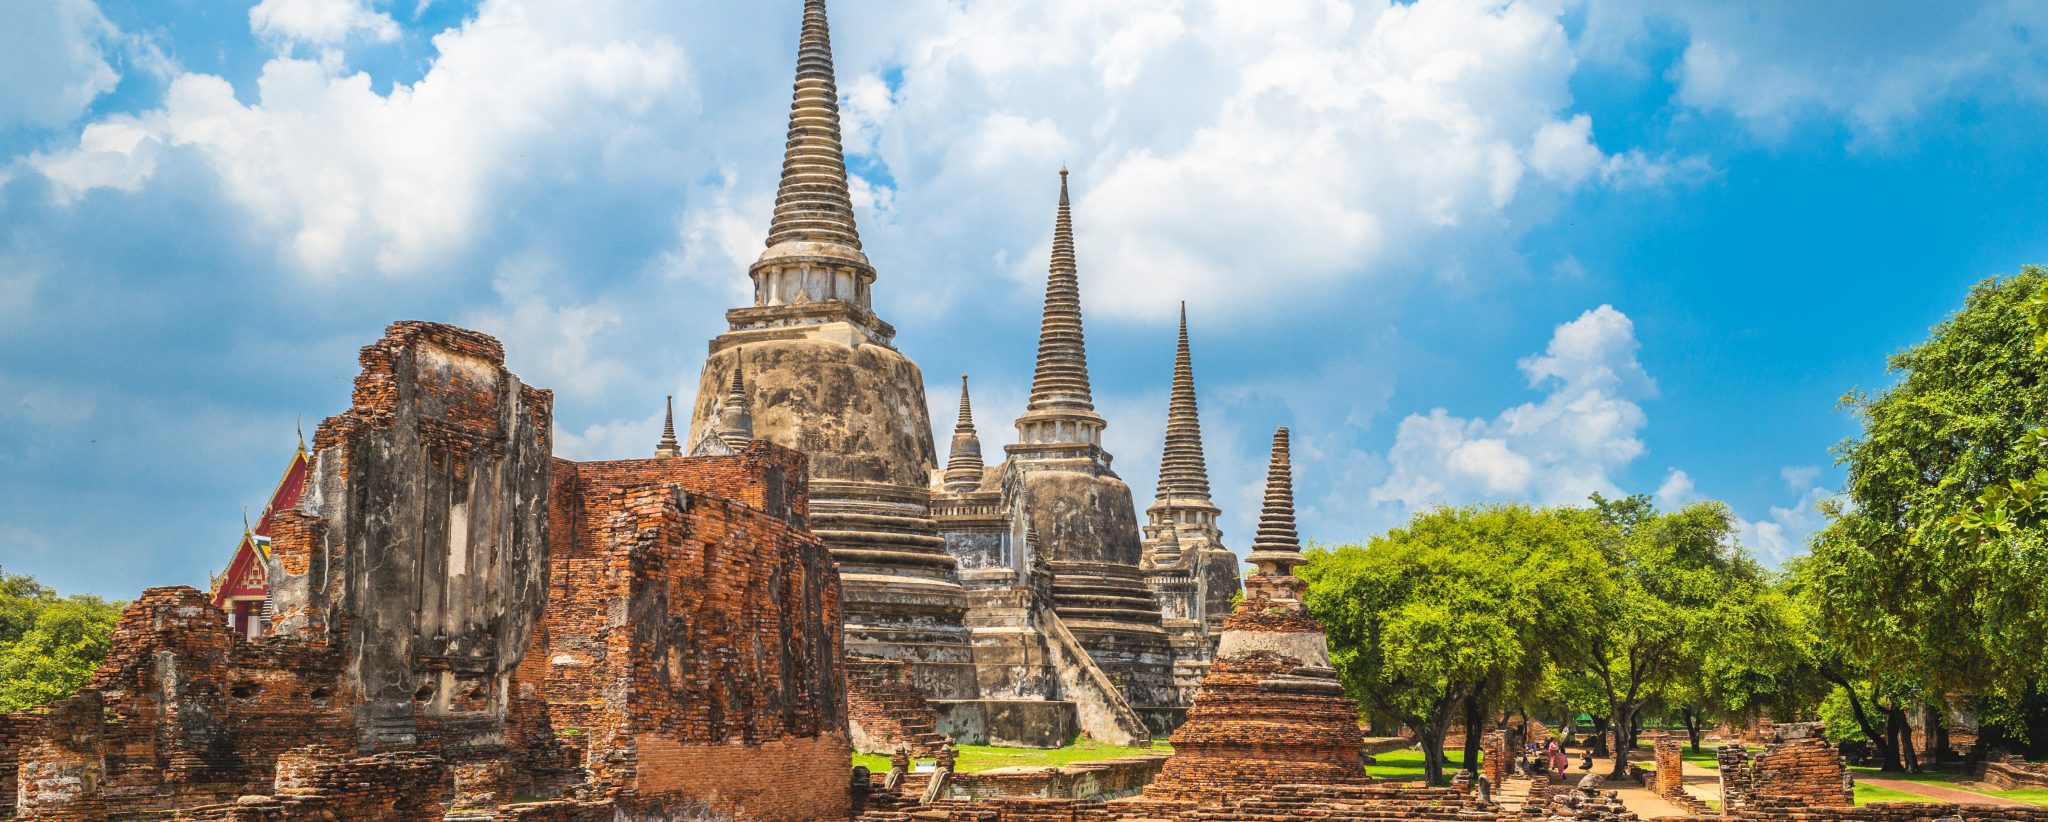 The Lost City of Ayutthaya in One Day